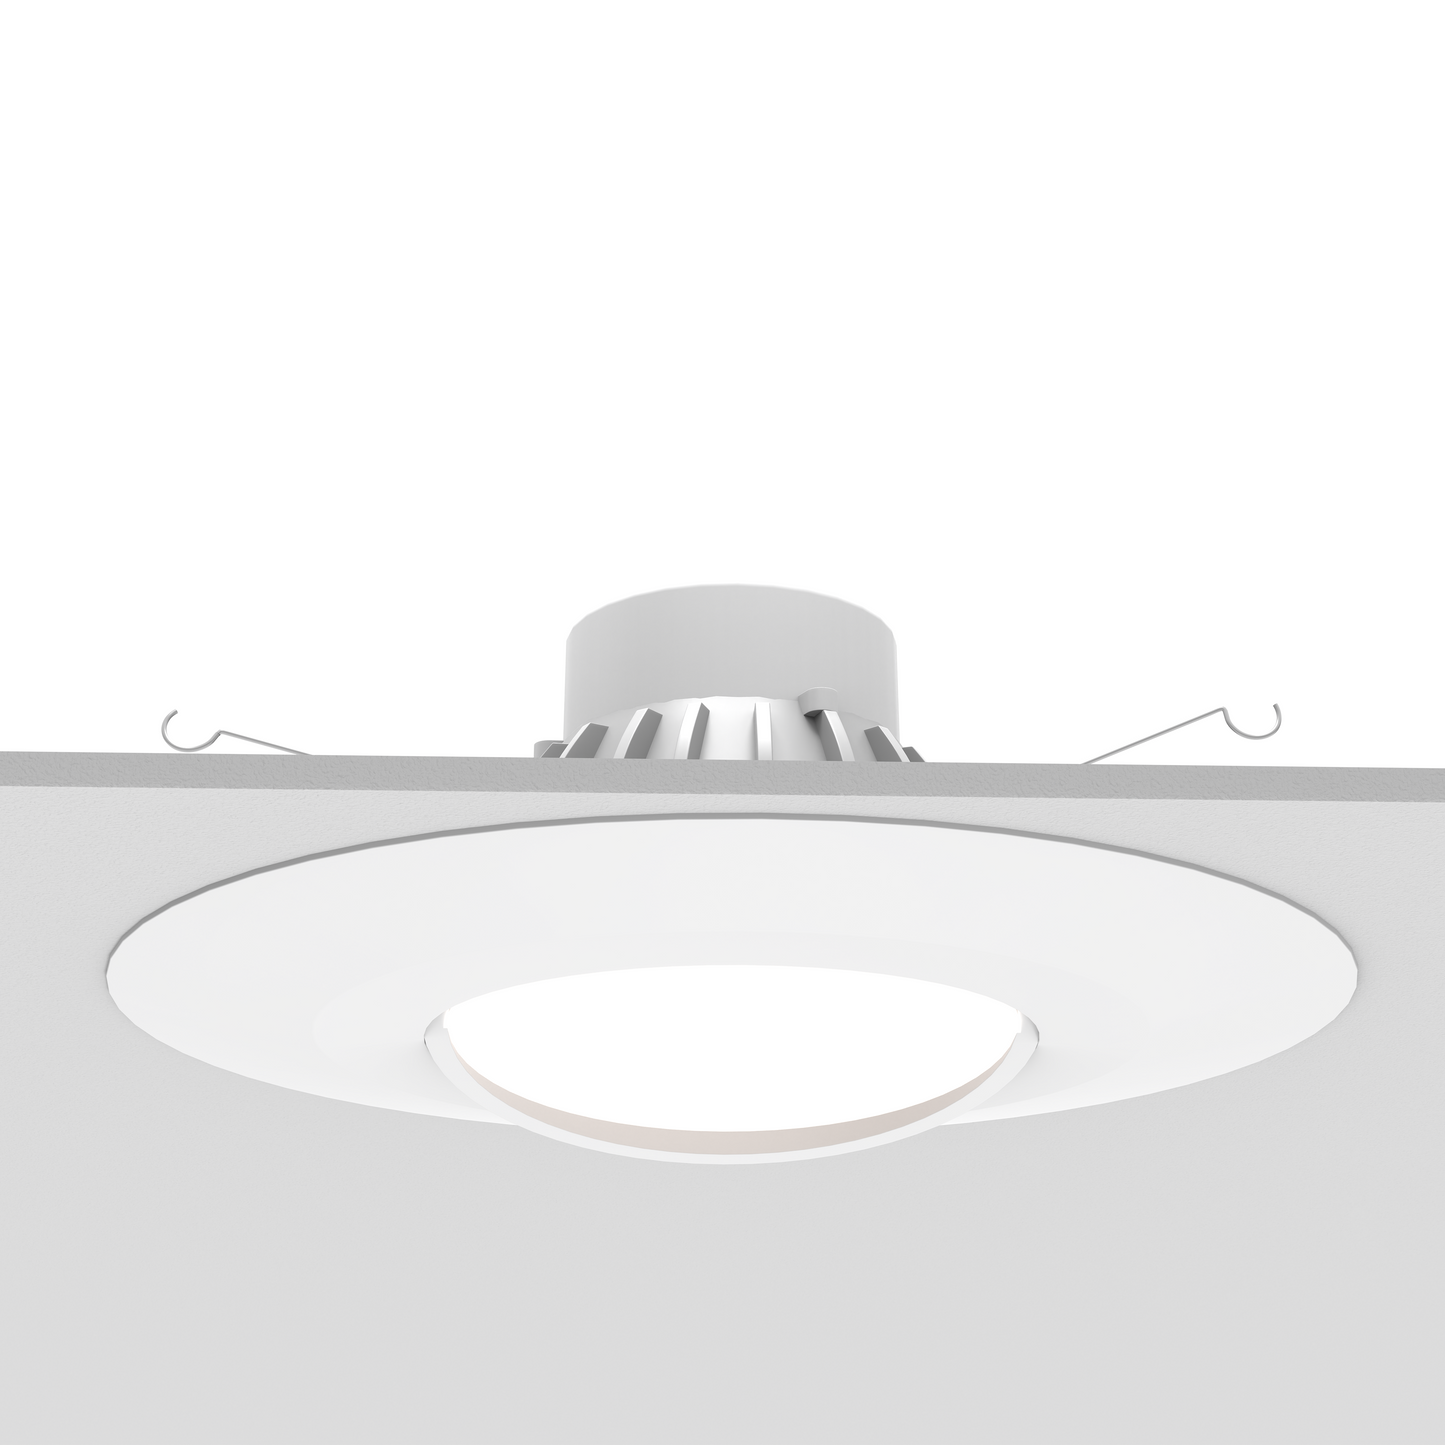 4 Inch LED Recessed Lighting with Adjustable Eyeball, 10W, Dimmable, Mounting Clip, Recessed Downlights For Living Room, Office, Closets, Kitchens, Hallways